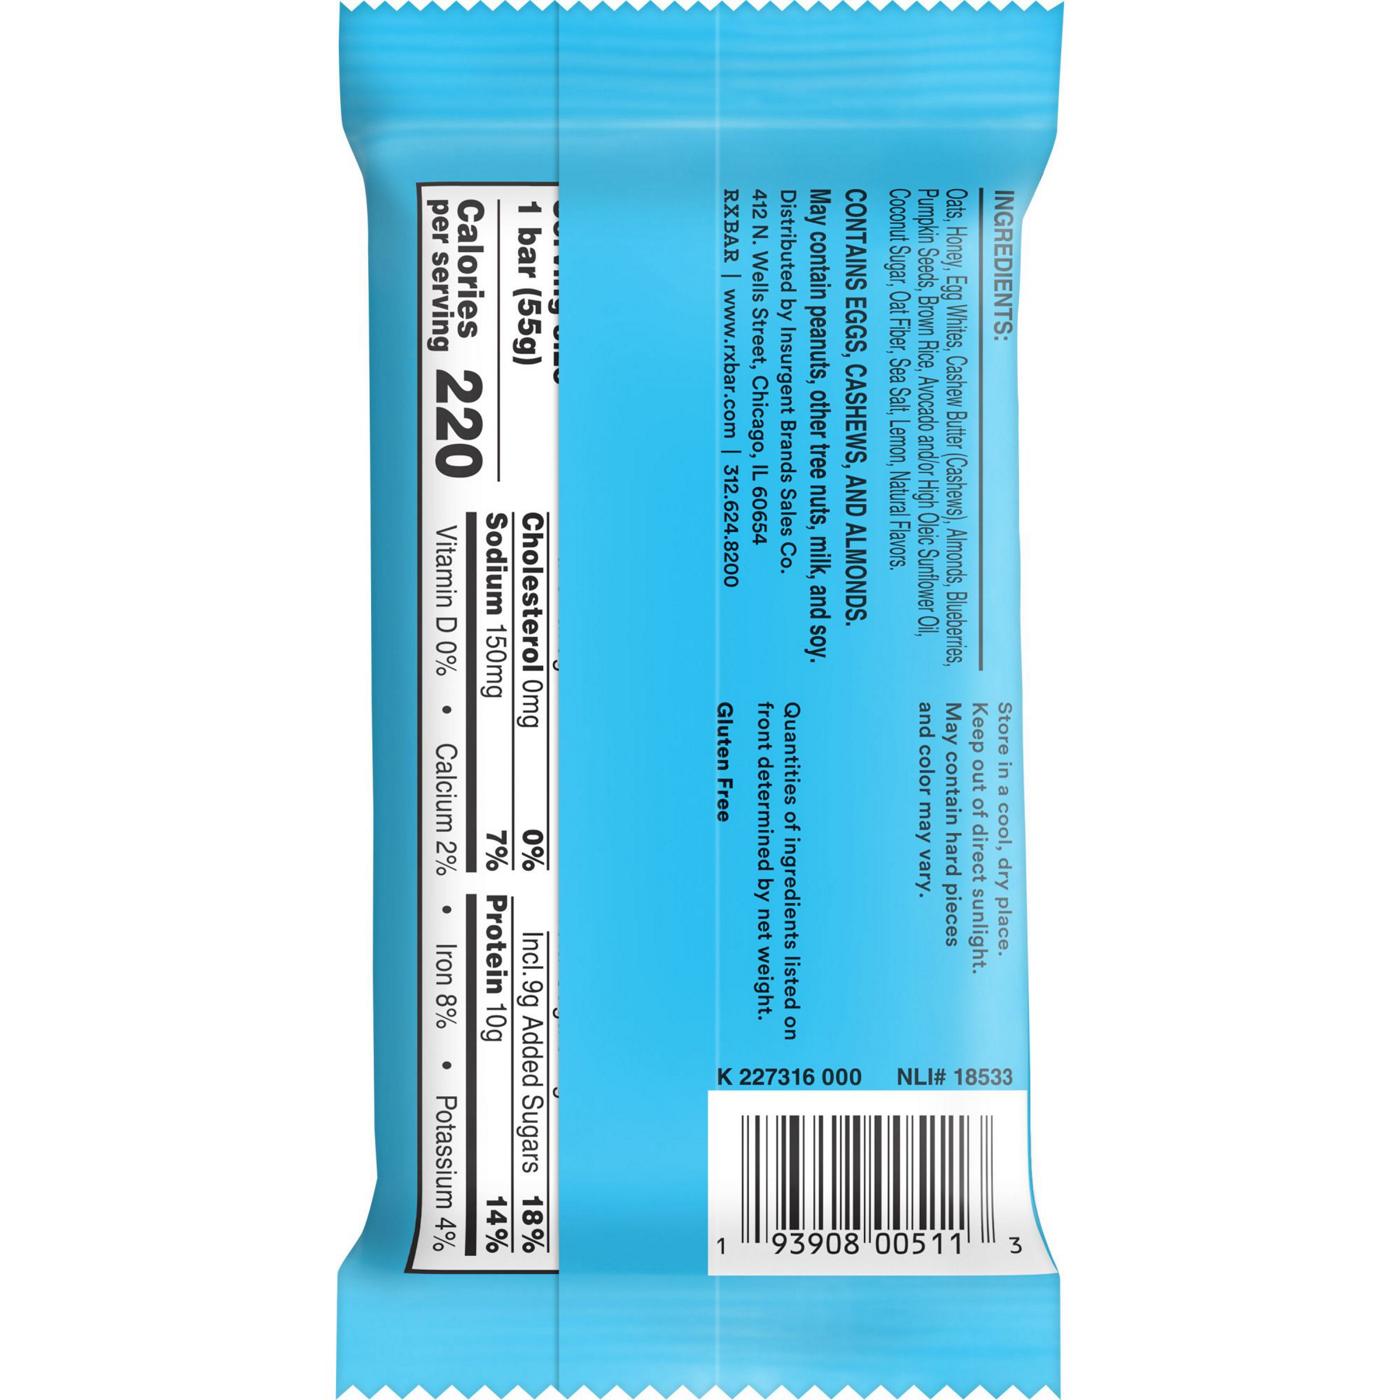 RXBAR Nut Butter and Oat Blueberry Cashew Butter Protein Bars; image 2 of 2